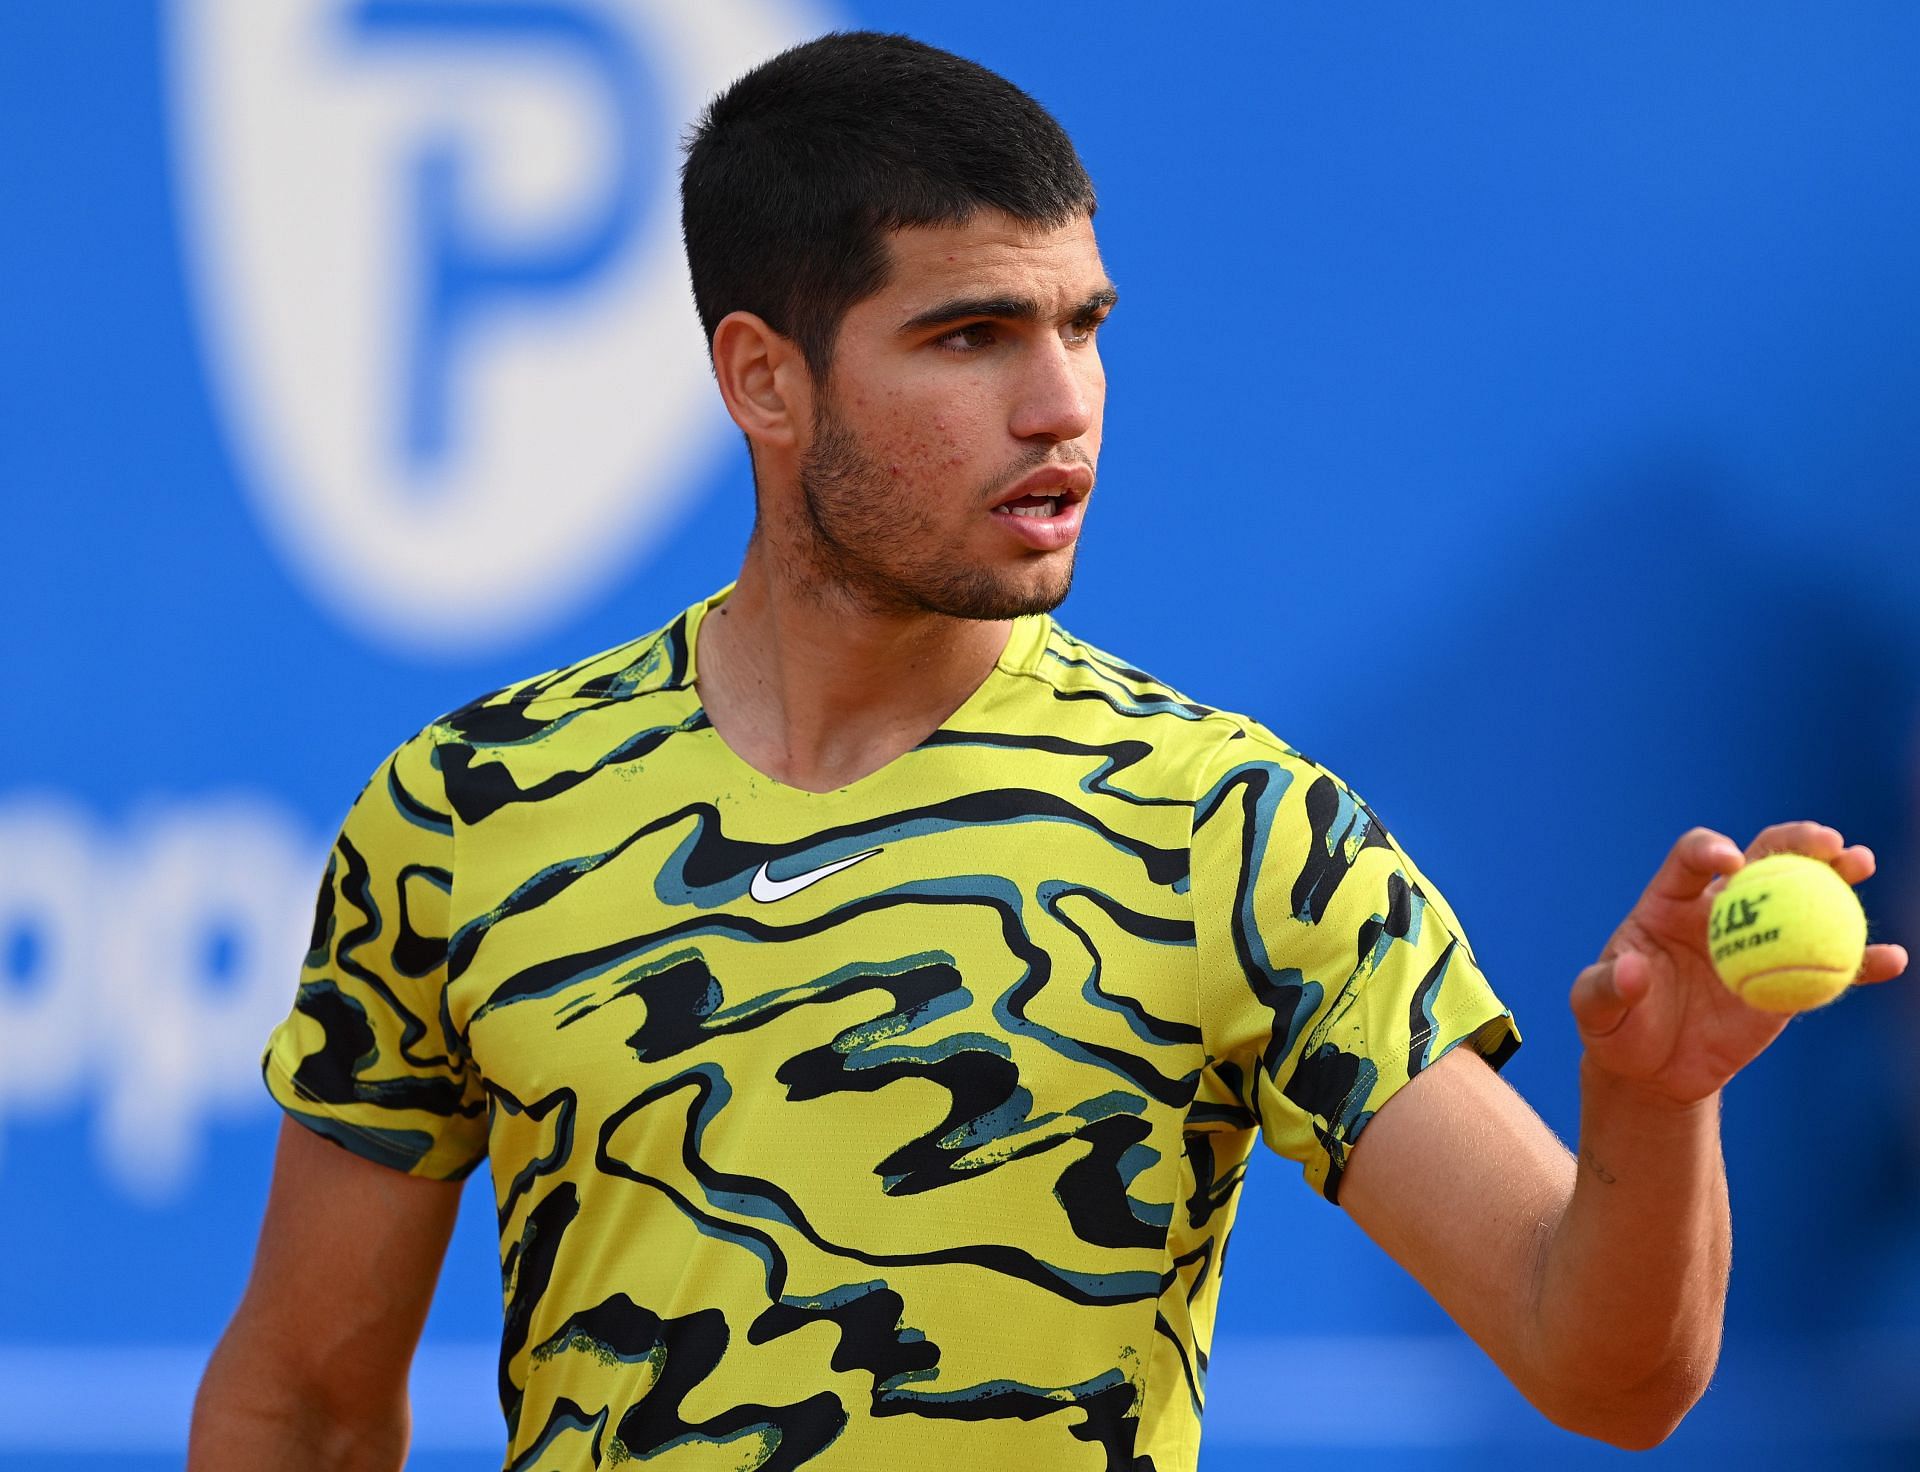 Carlos Alcaraz is seeded second at the Madrid Open